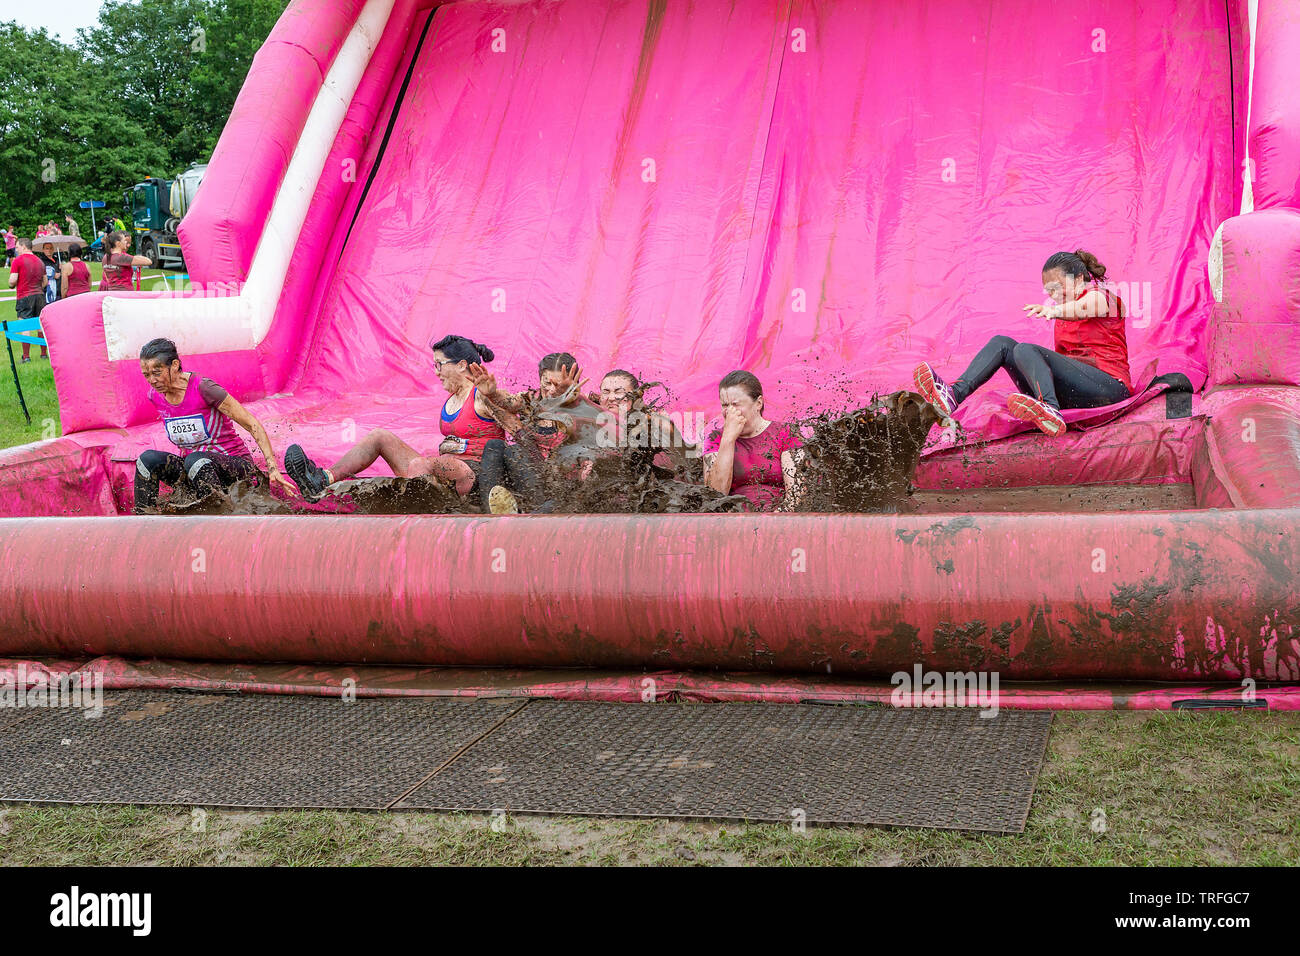 Warrington, UK. 2nd June 2019. Race for Life 2019, Warrington, in aid of Cancer Research. 6 friends slide into the mud pit together Stock Photo